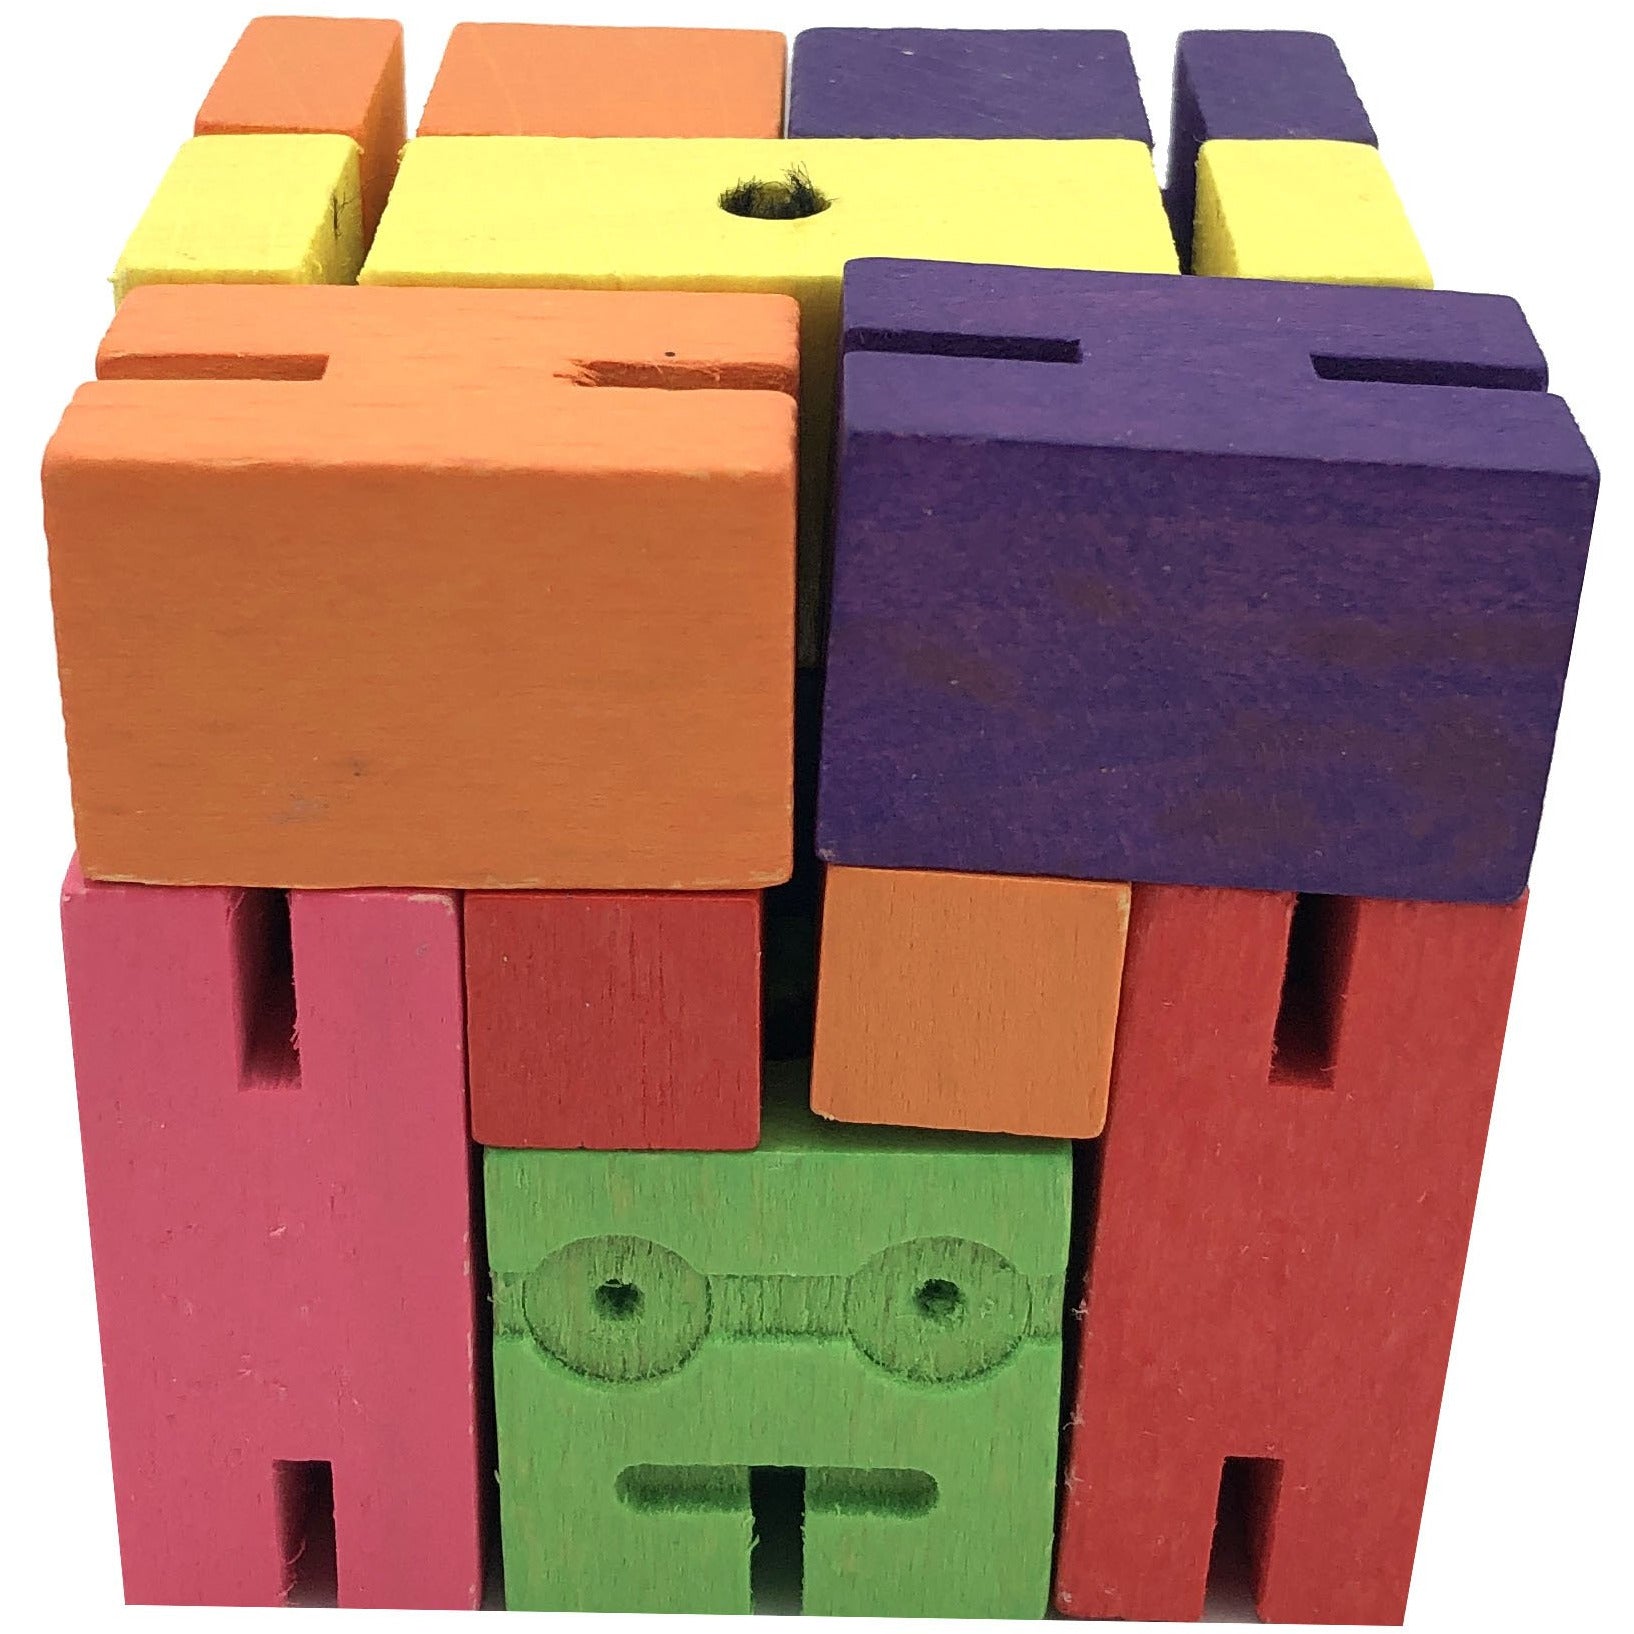 Areaware Mini Cubebot / Wooden Toy Robot / Multicoloured